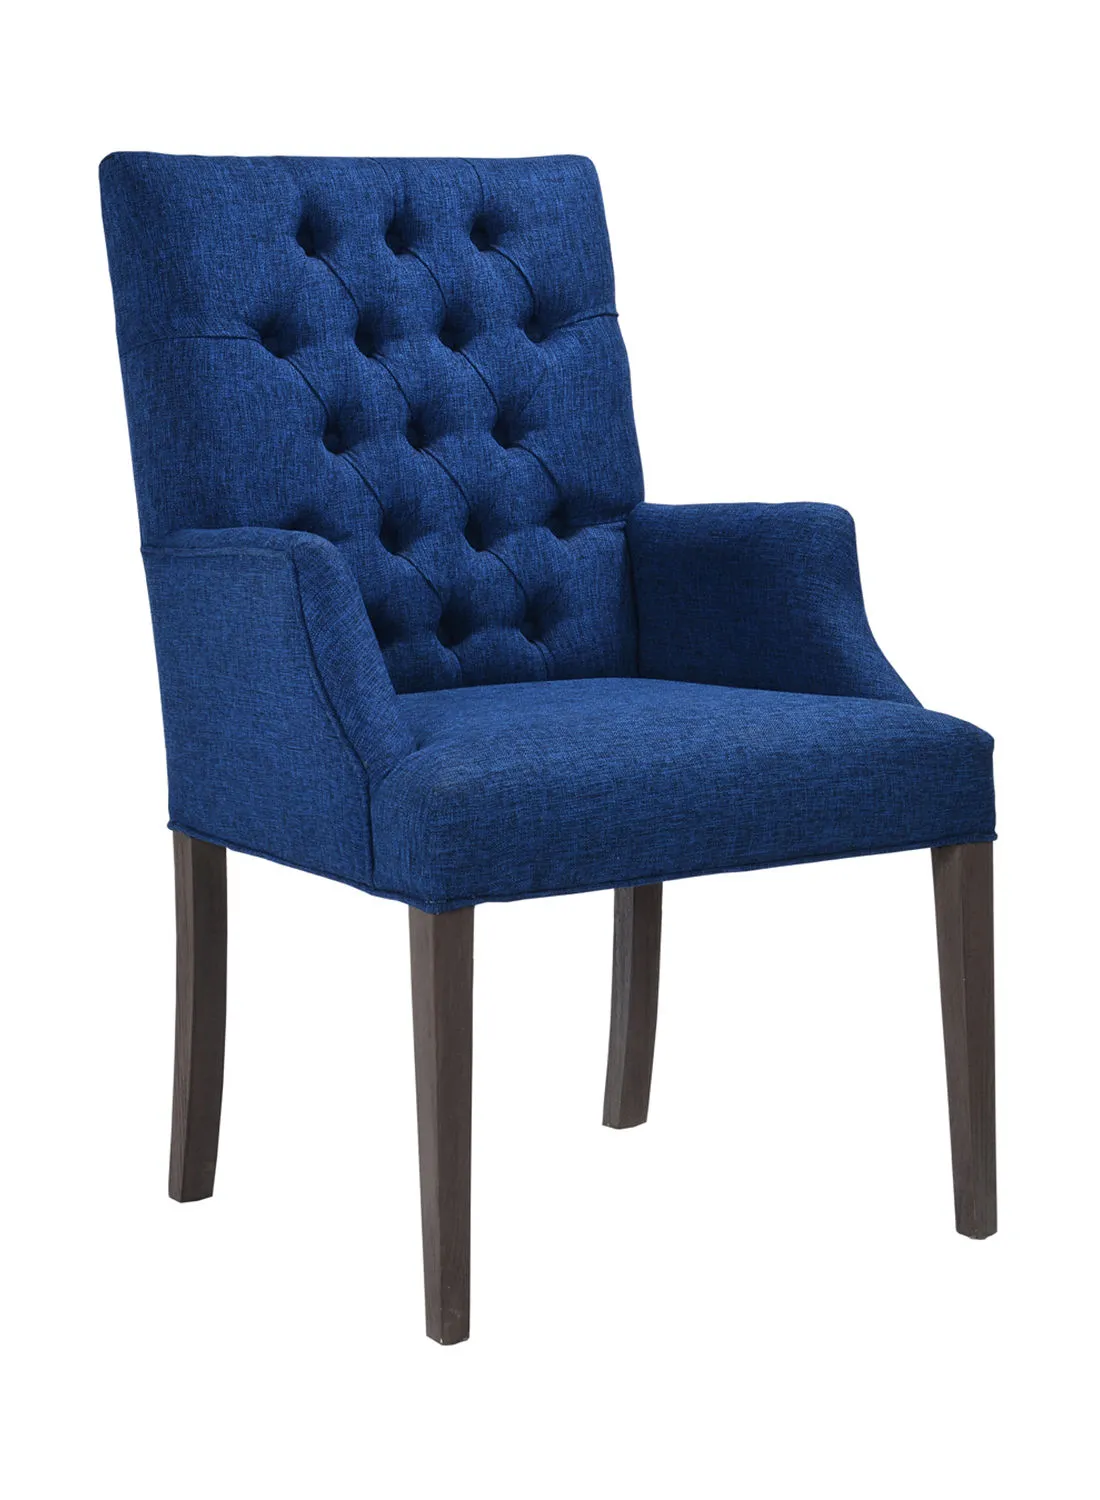 ebb & flow Dining Chair Luxurious - In Oak/Blue Wooden Chair Size 63.5 X 67 X 105